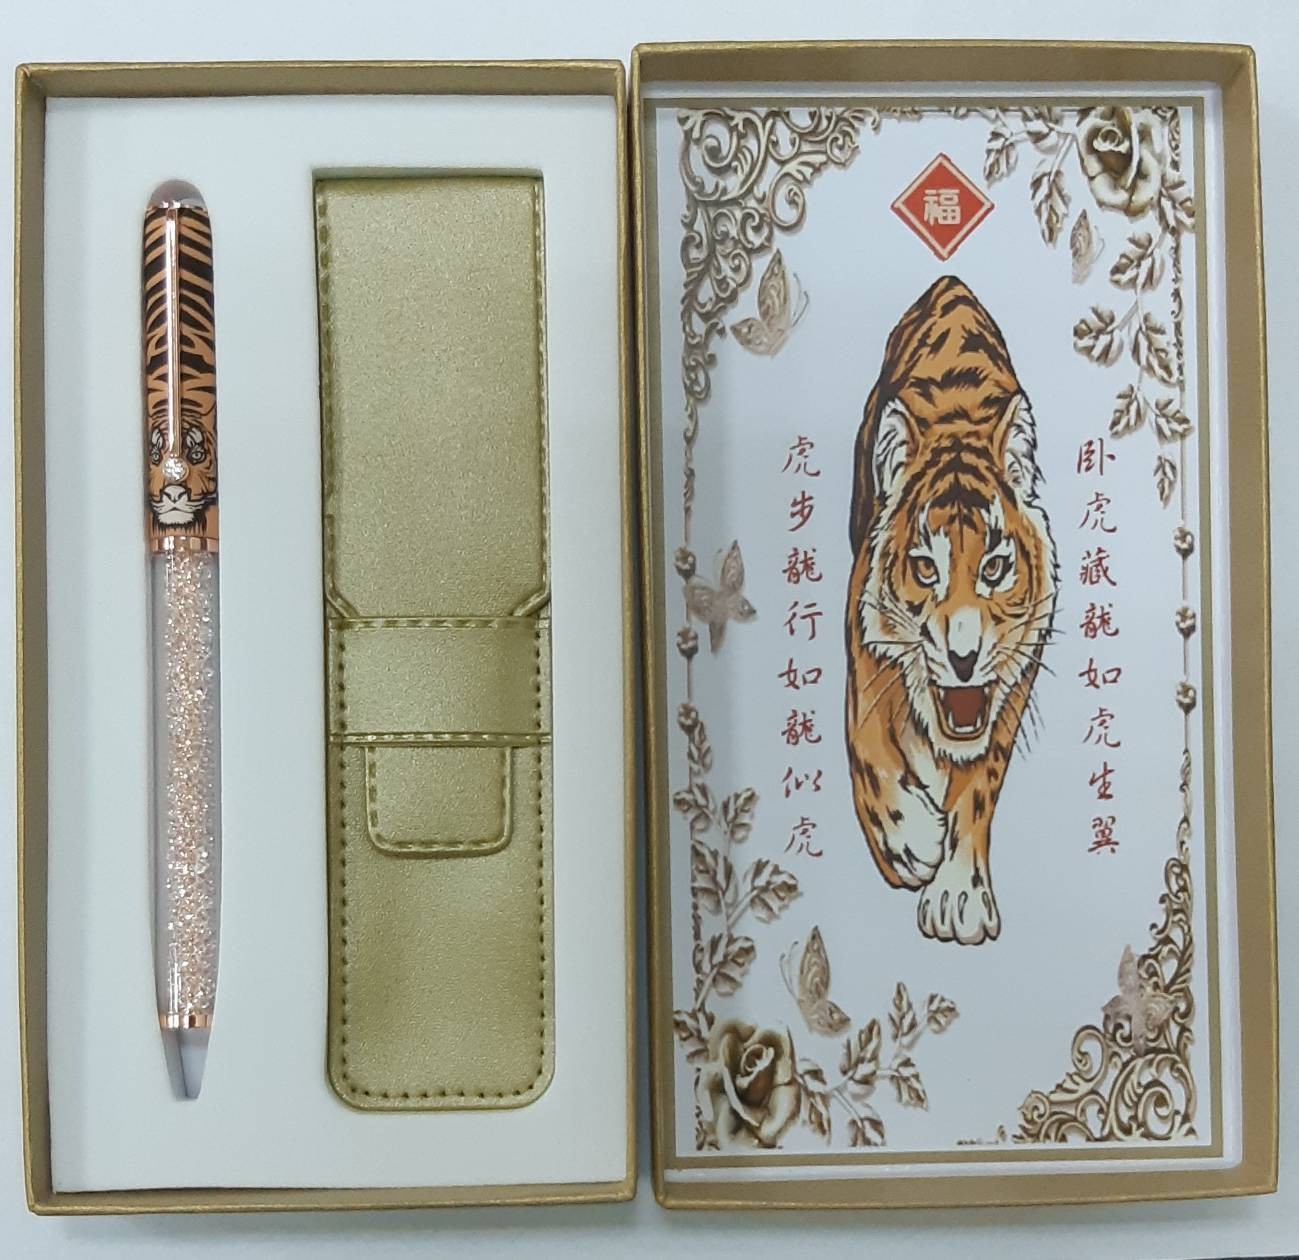 Stardust crystal point pen AD-022 for tiger year design